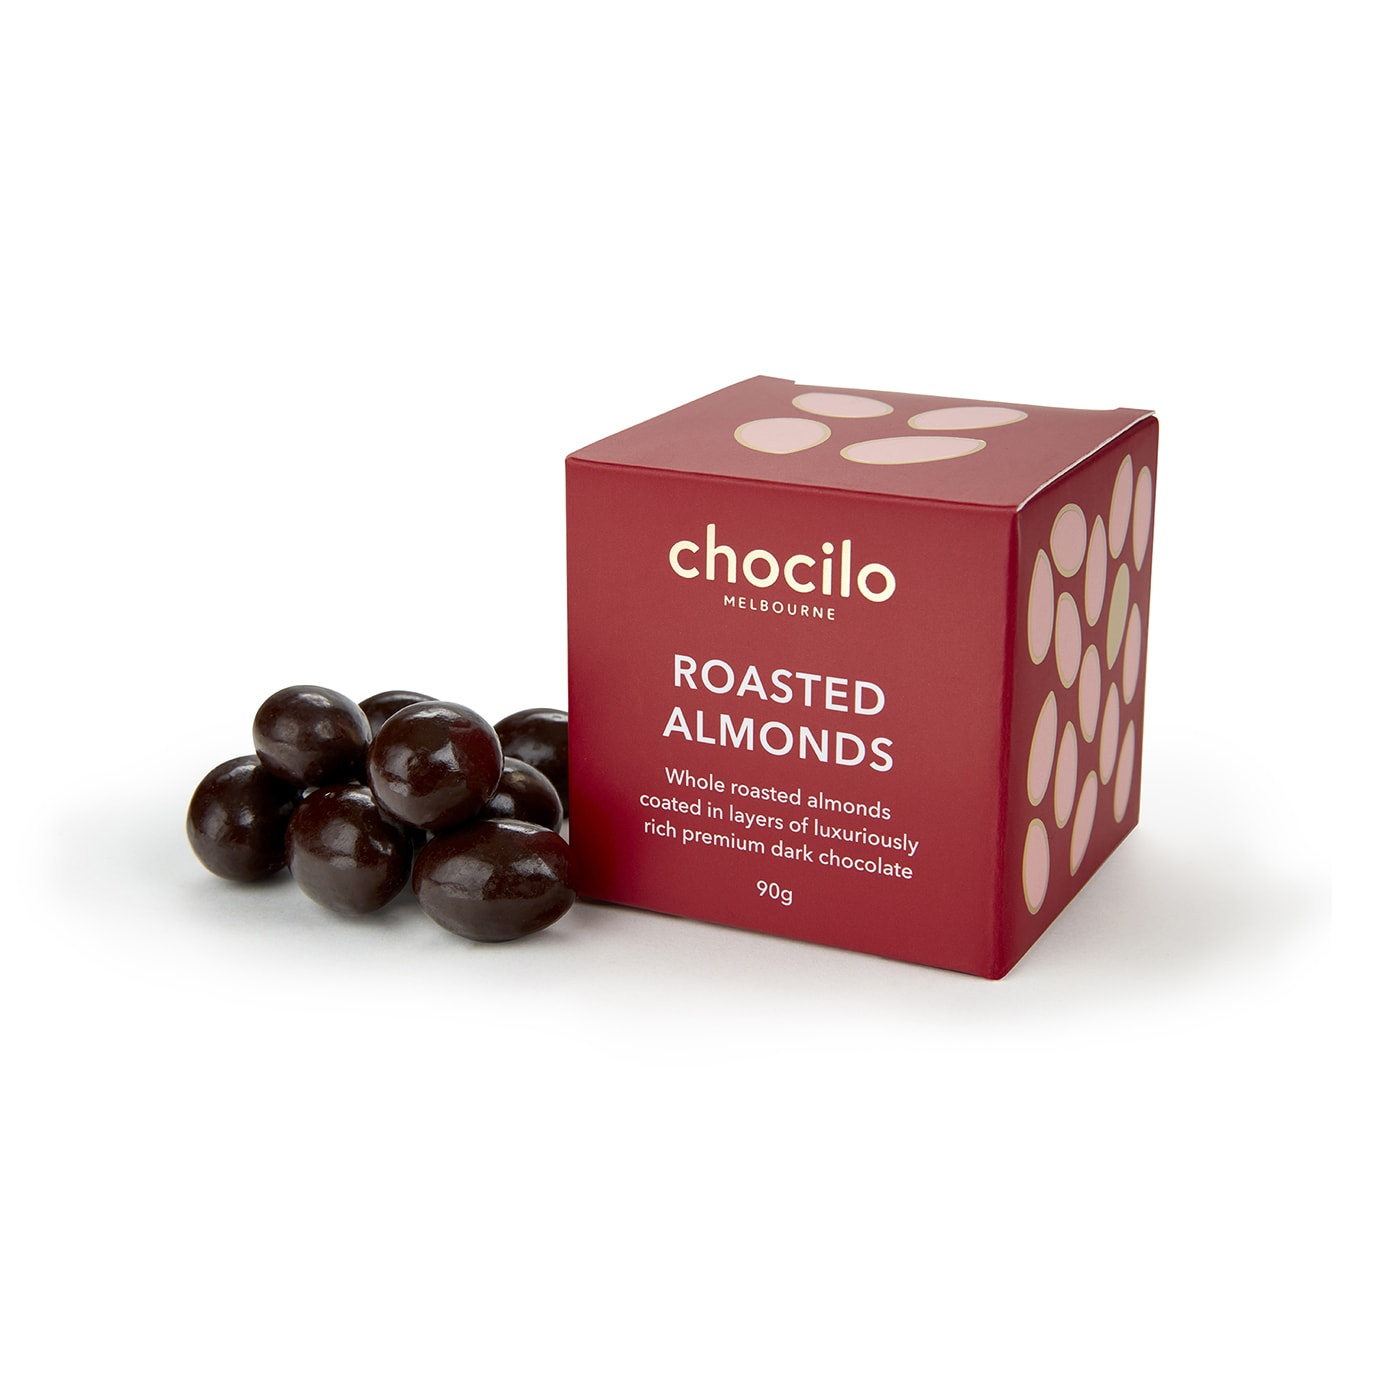 Chocilo Melbourne Dark Chocolate coated Roasted Almonds Gift Cube